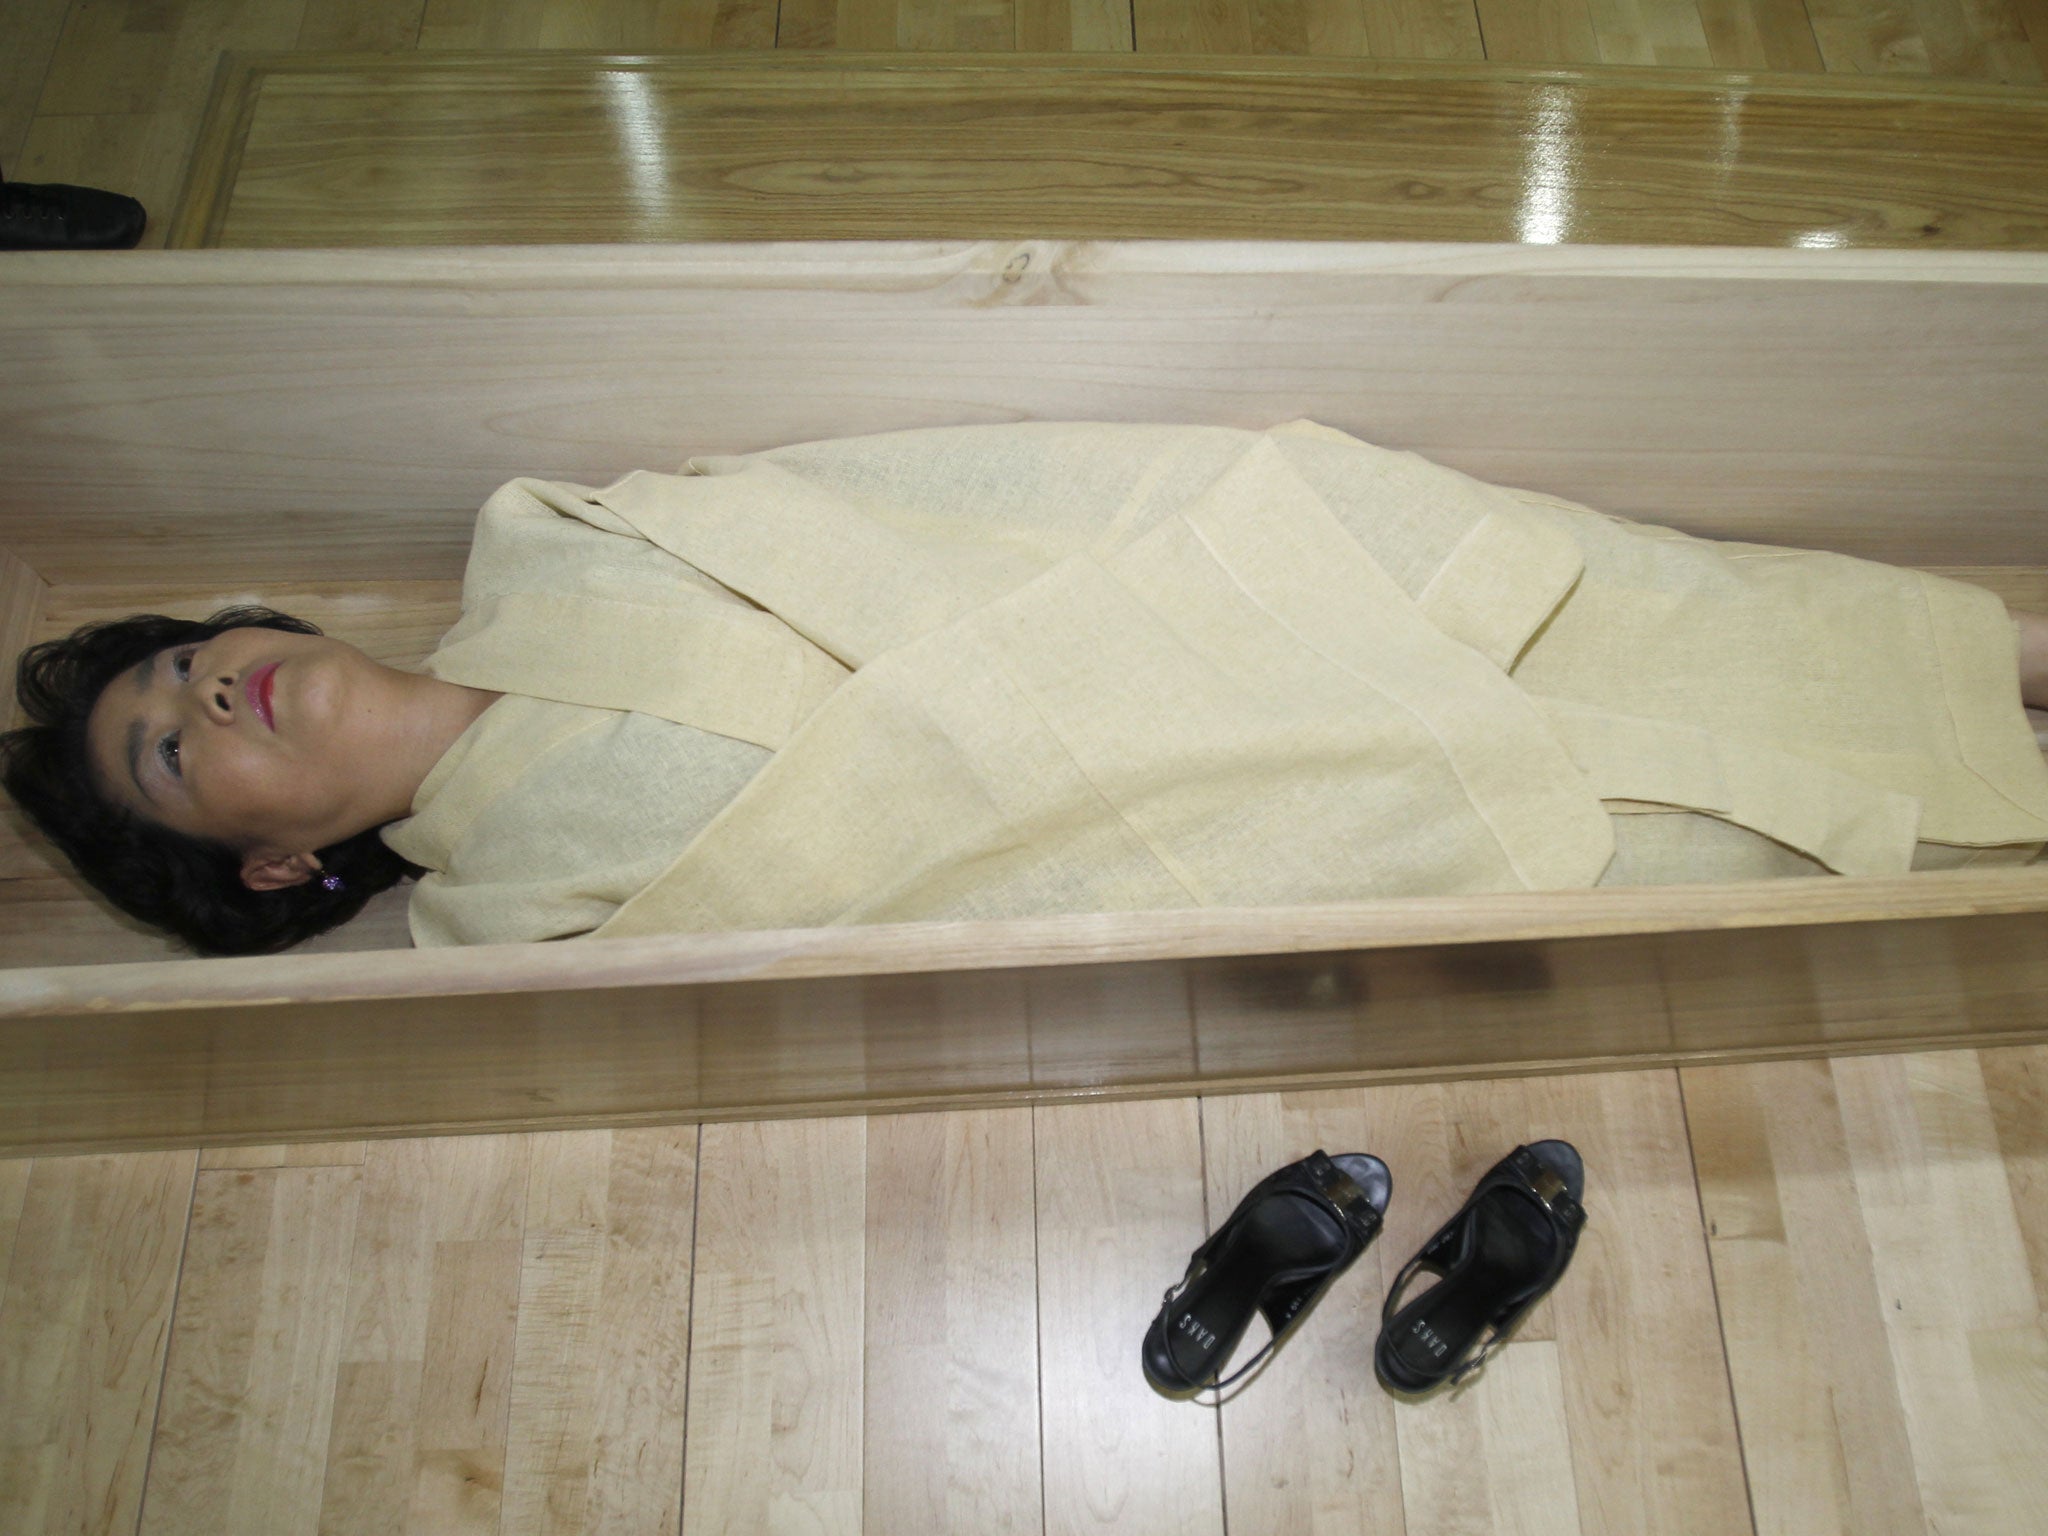 A woman, donning a traditional yellow hemp robe, lies down in a coffin during a "well-dying? course, run by a local district office in Seoul.The course, run by a local district office in the northeast of Seoul, has an aim: "Don't take life for granted." While some see the mock funeral as a way to reflect on one's life and prepare for death, many sceptics still question whether death simulation can prevent suicide and blame some entrepreneurs for using this as a commercial event